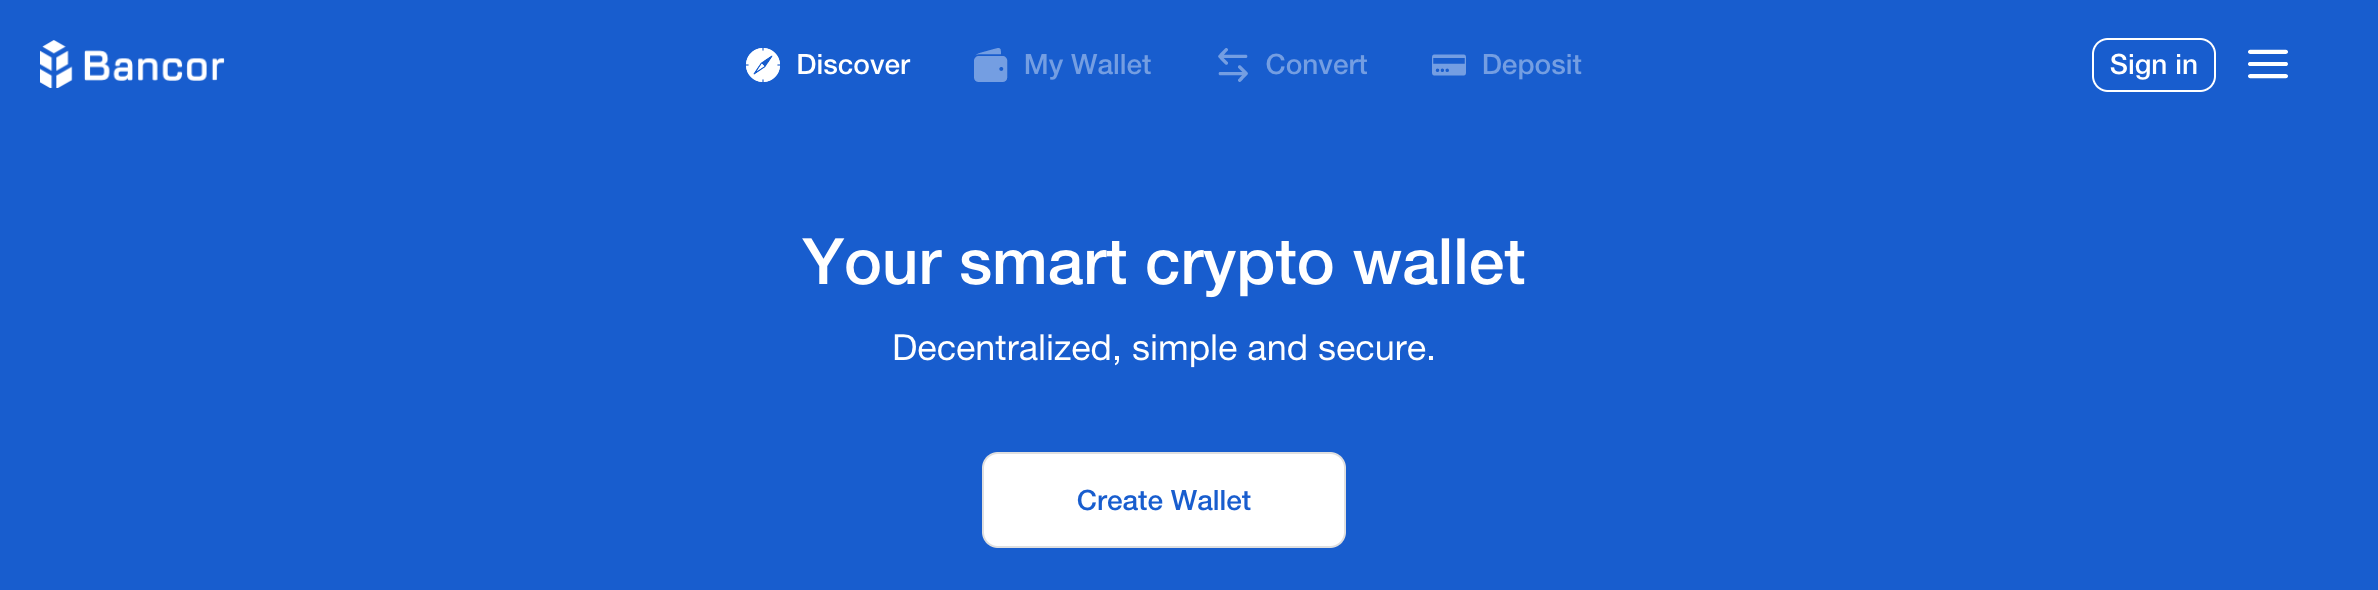 Bancor site says they are decentralized, simple and secure